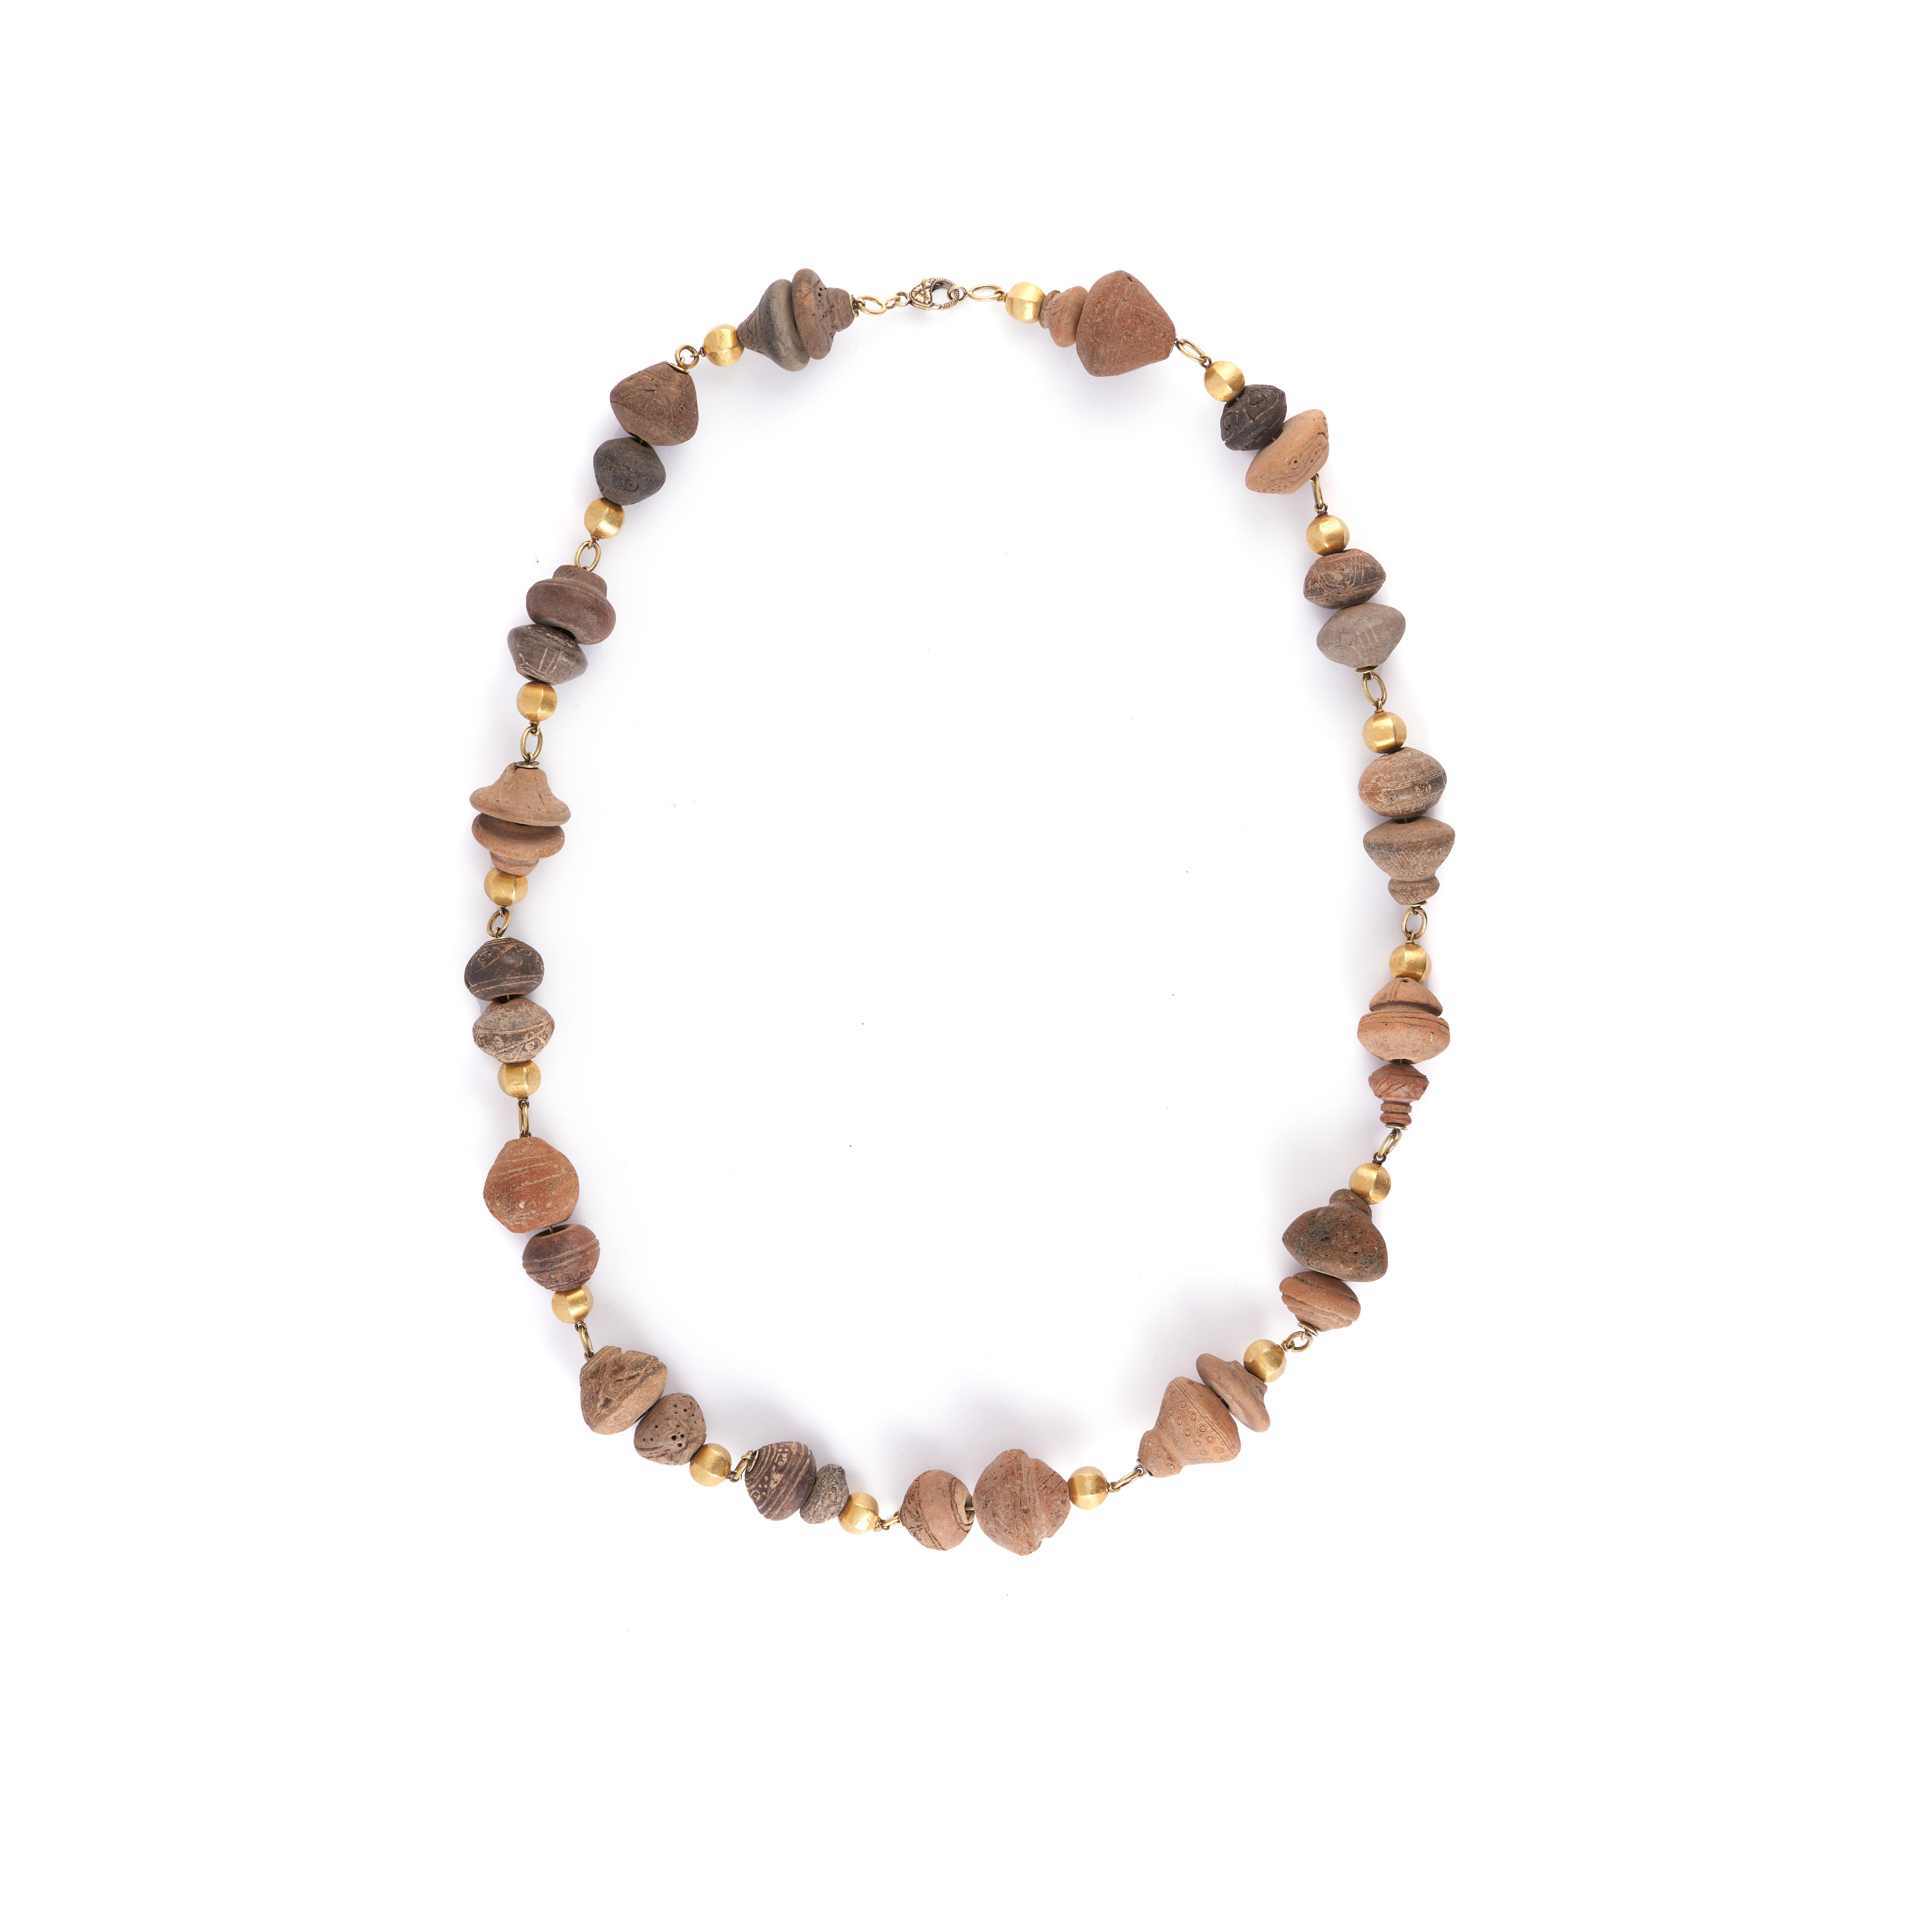 Stunning necklace sure to grab attention whenever you wear it!  Own a piece of history, with these beads dating back to the early first millenium.  

18kt Yellow Gold Beads and Clasp
34 inches long
Bead measure 0.5-1.0 inches wide

Los Angeles-based